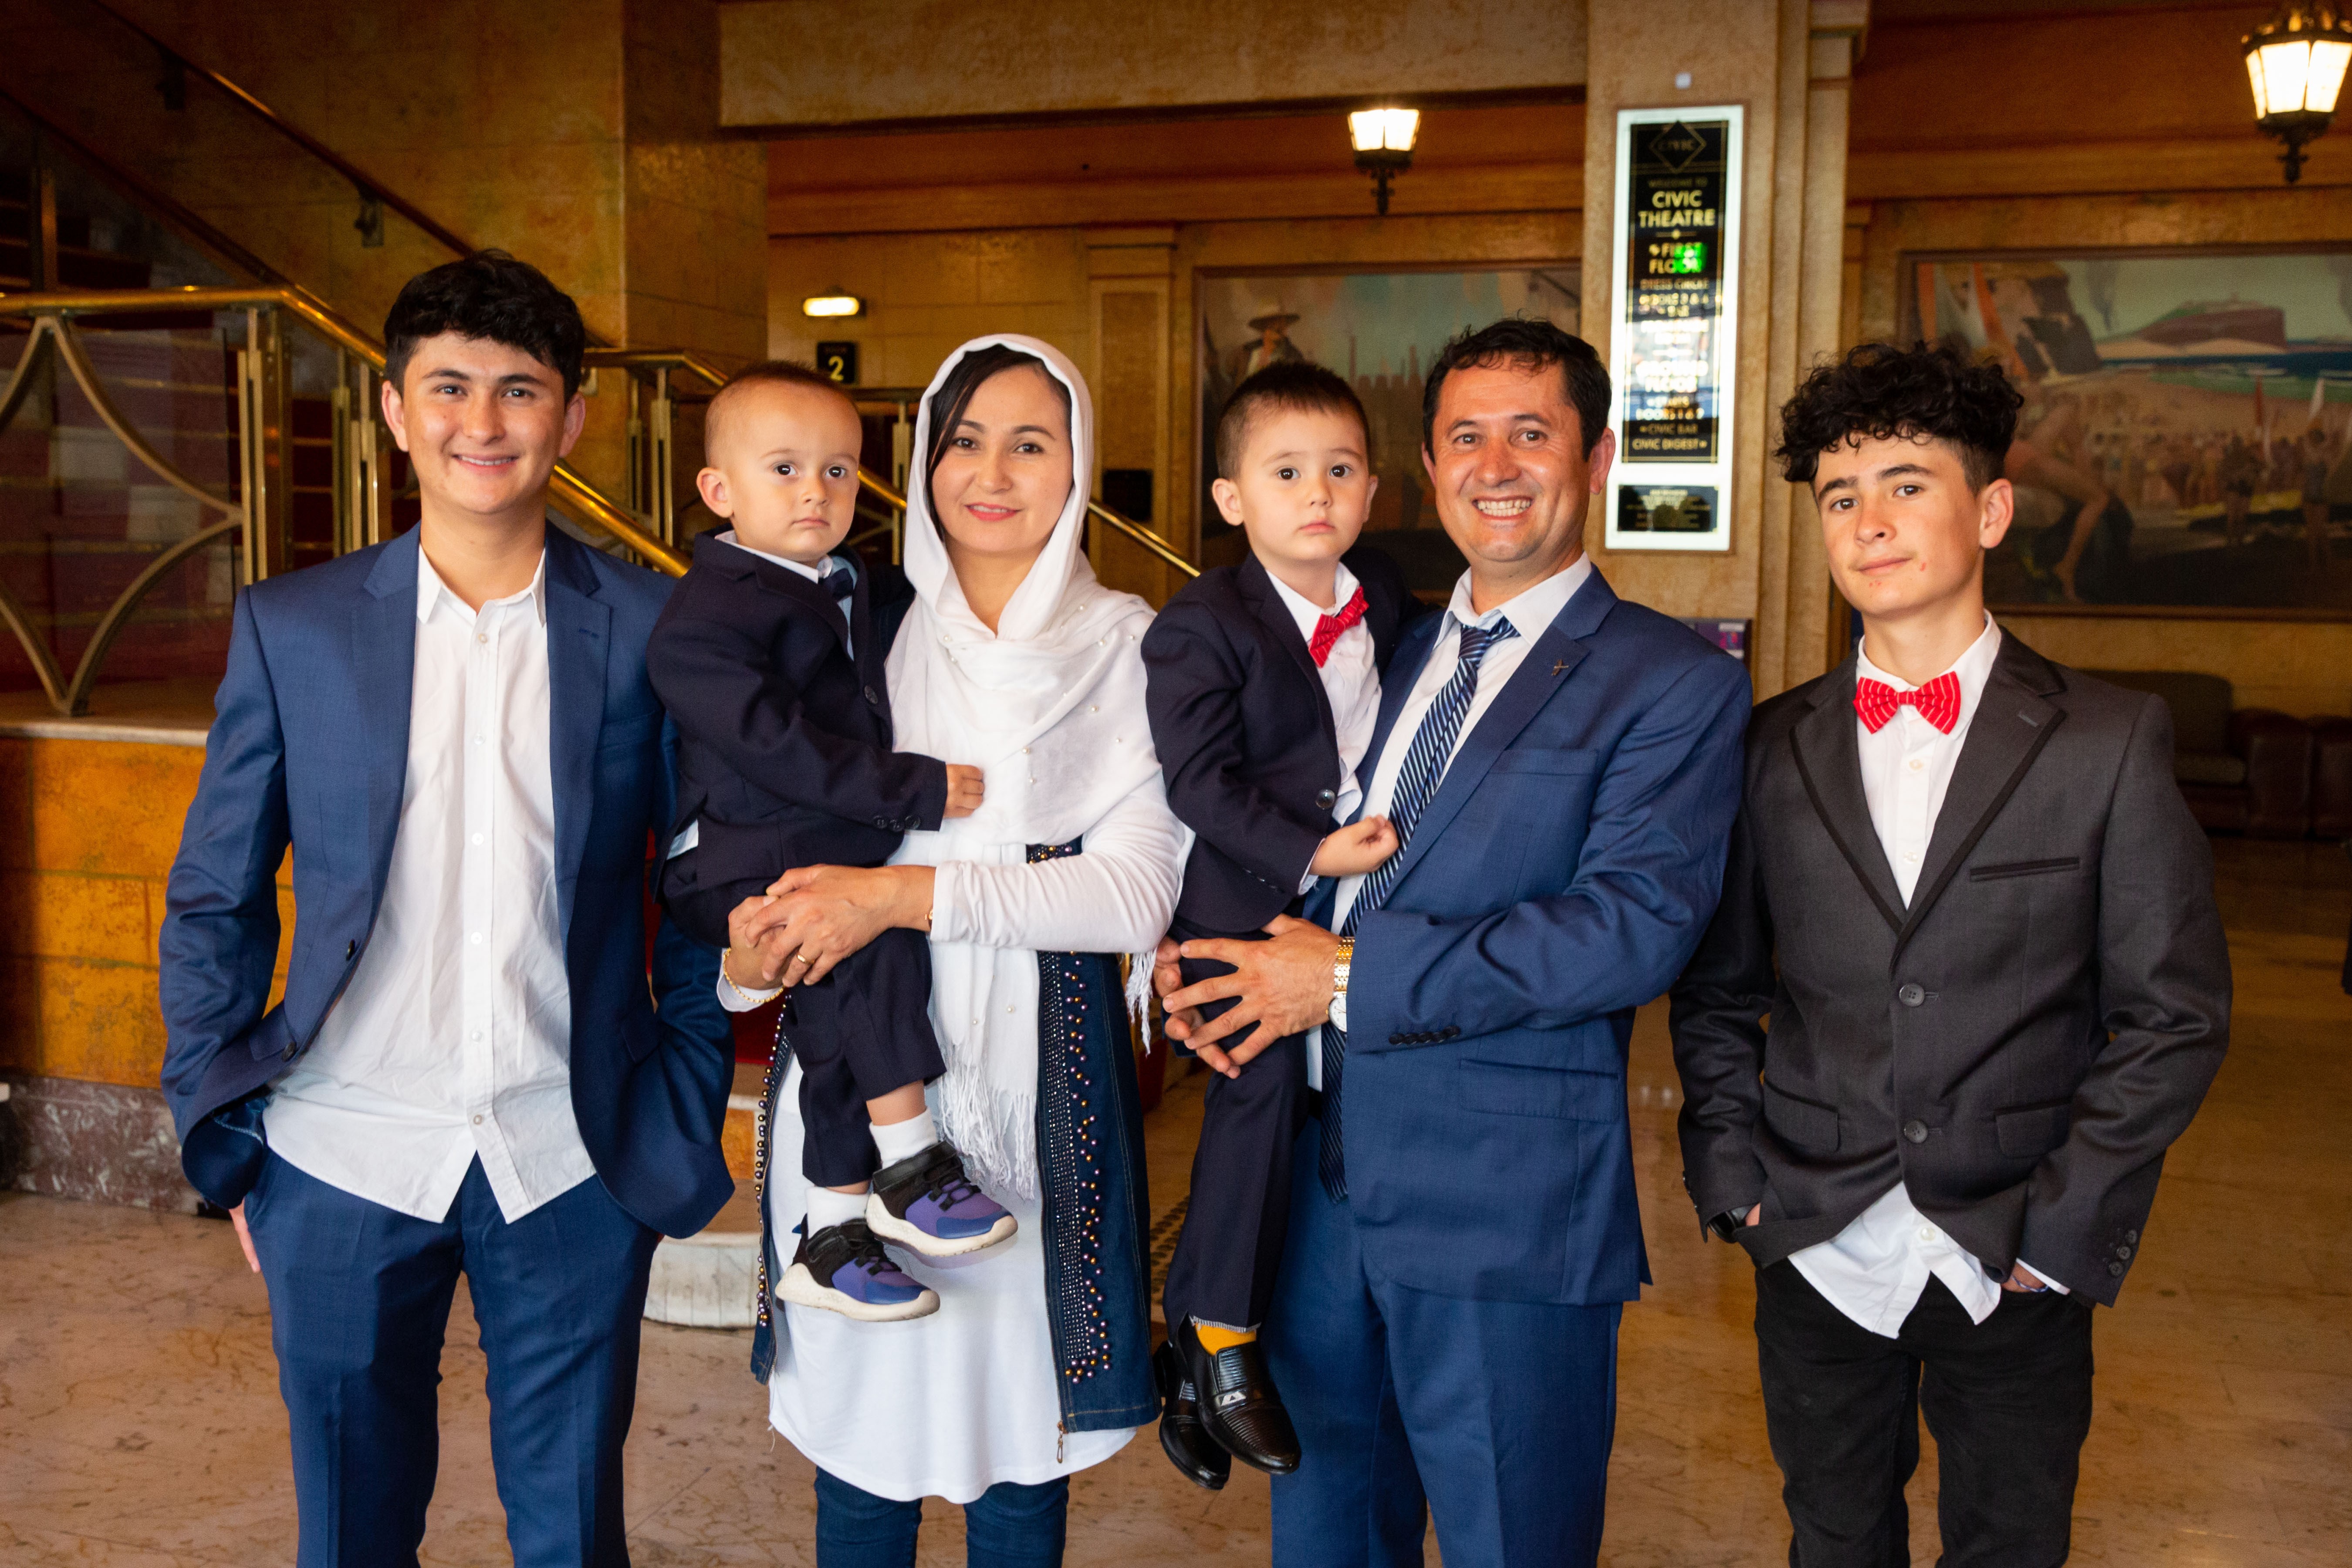 New-citizen-Mr-Khodadad-Karimi-with-his-wife-and-four-sons.jpg